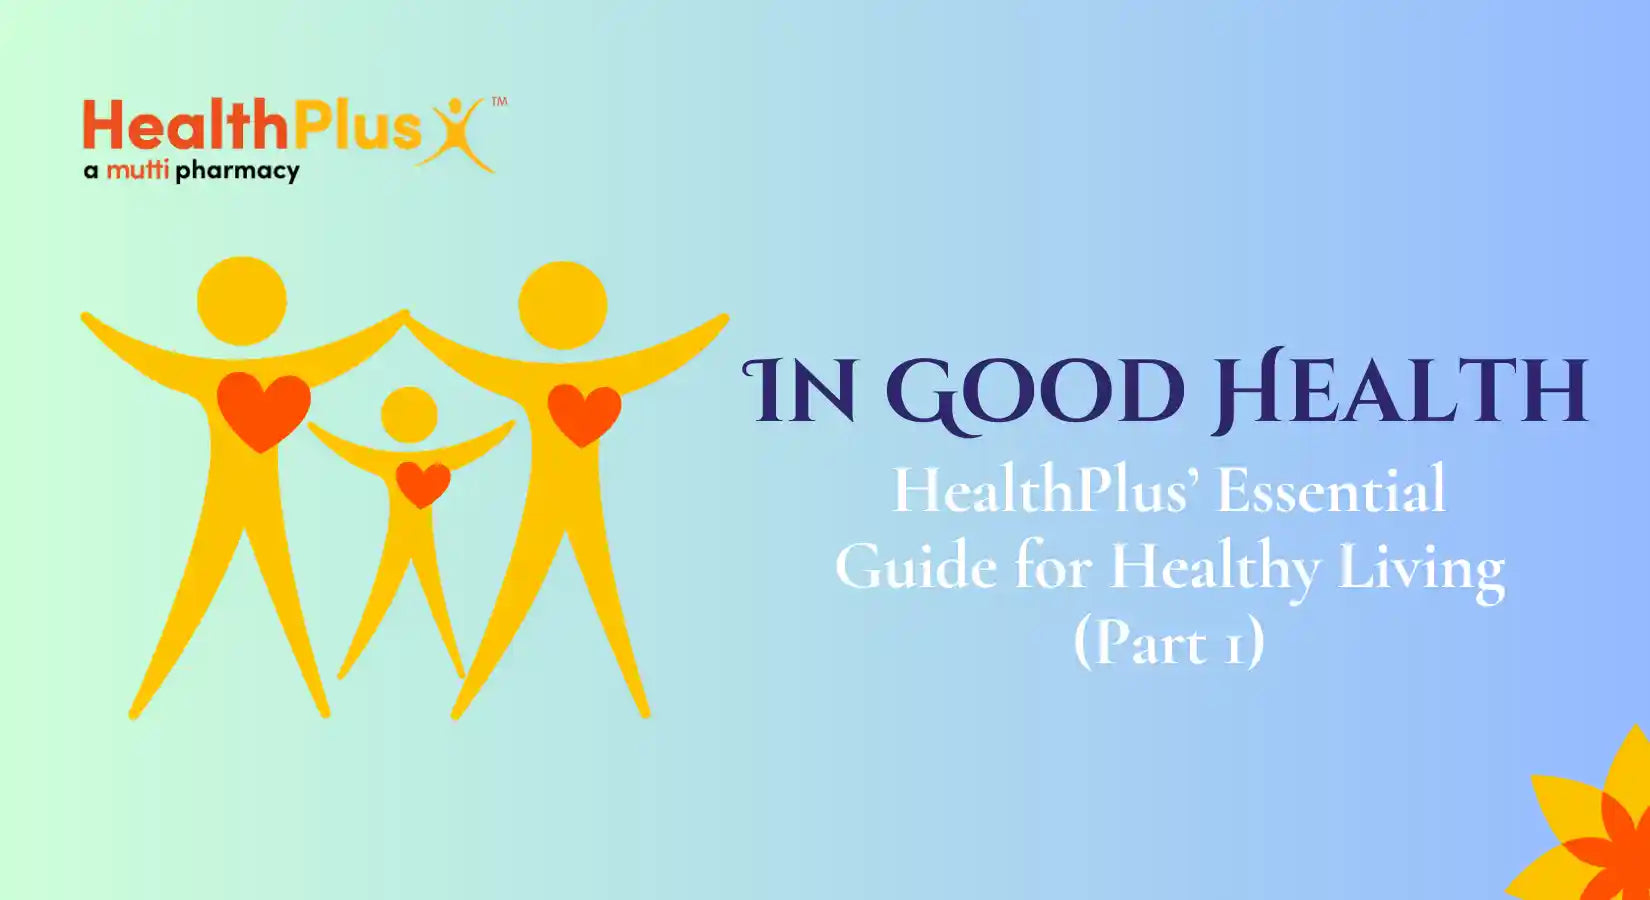 In Good Health: HealthPlus’ Essential Guide for Healthy Living (Part 1)